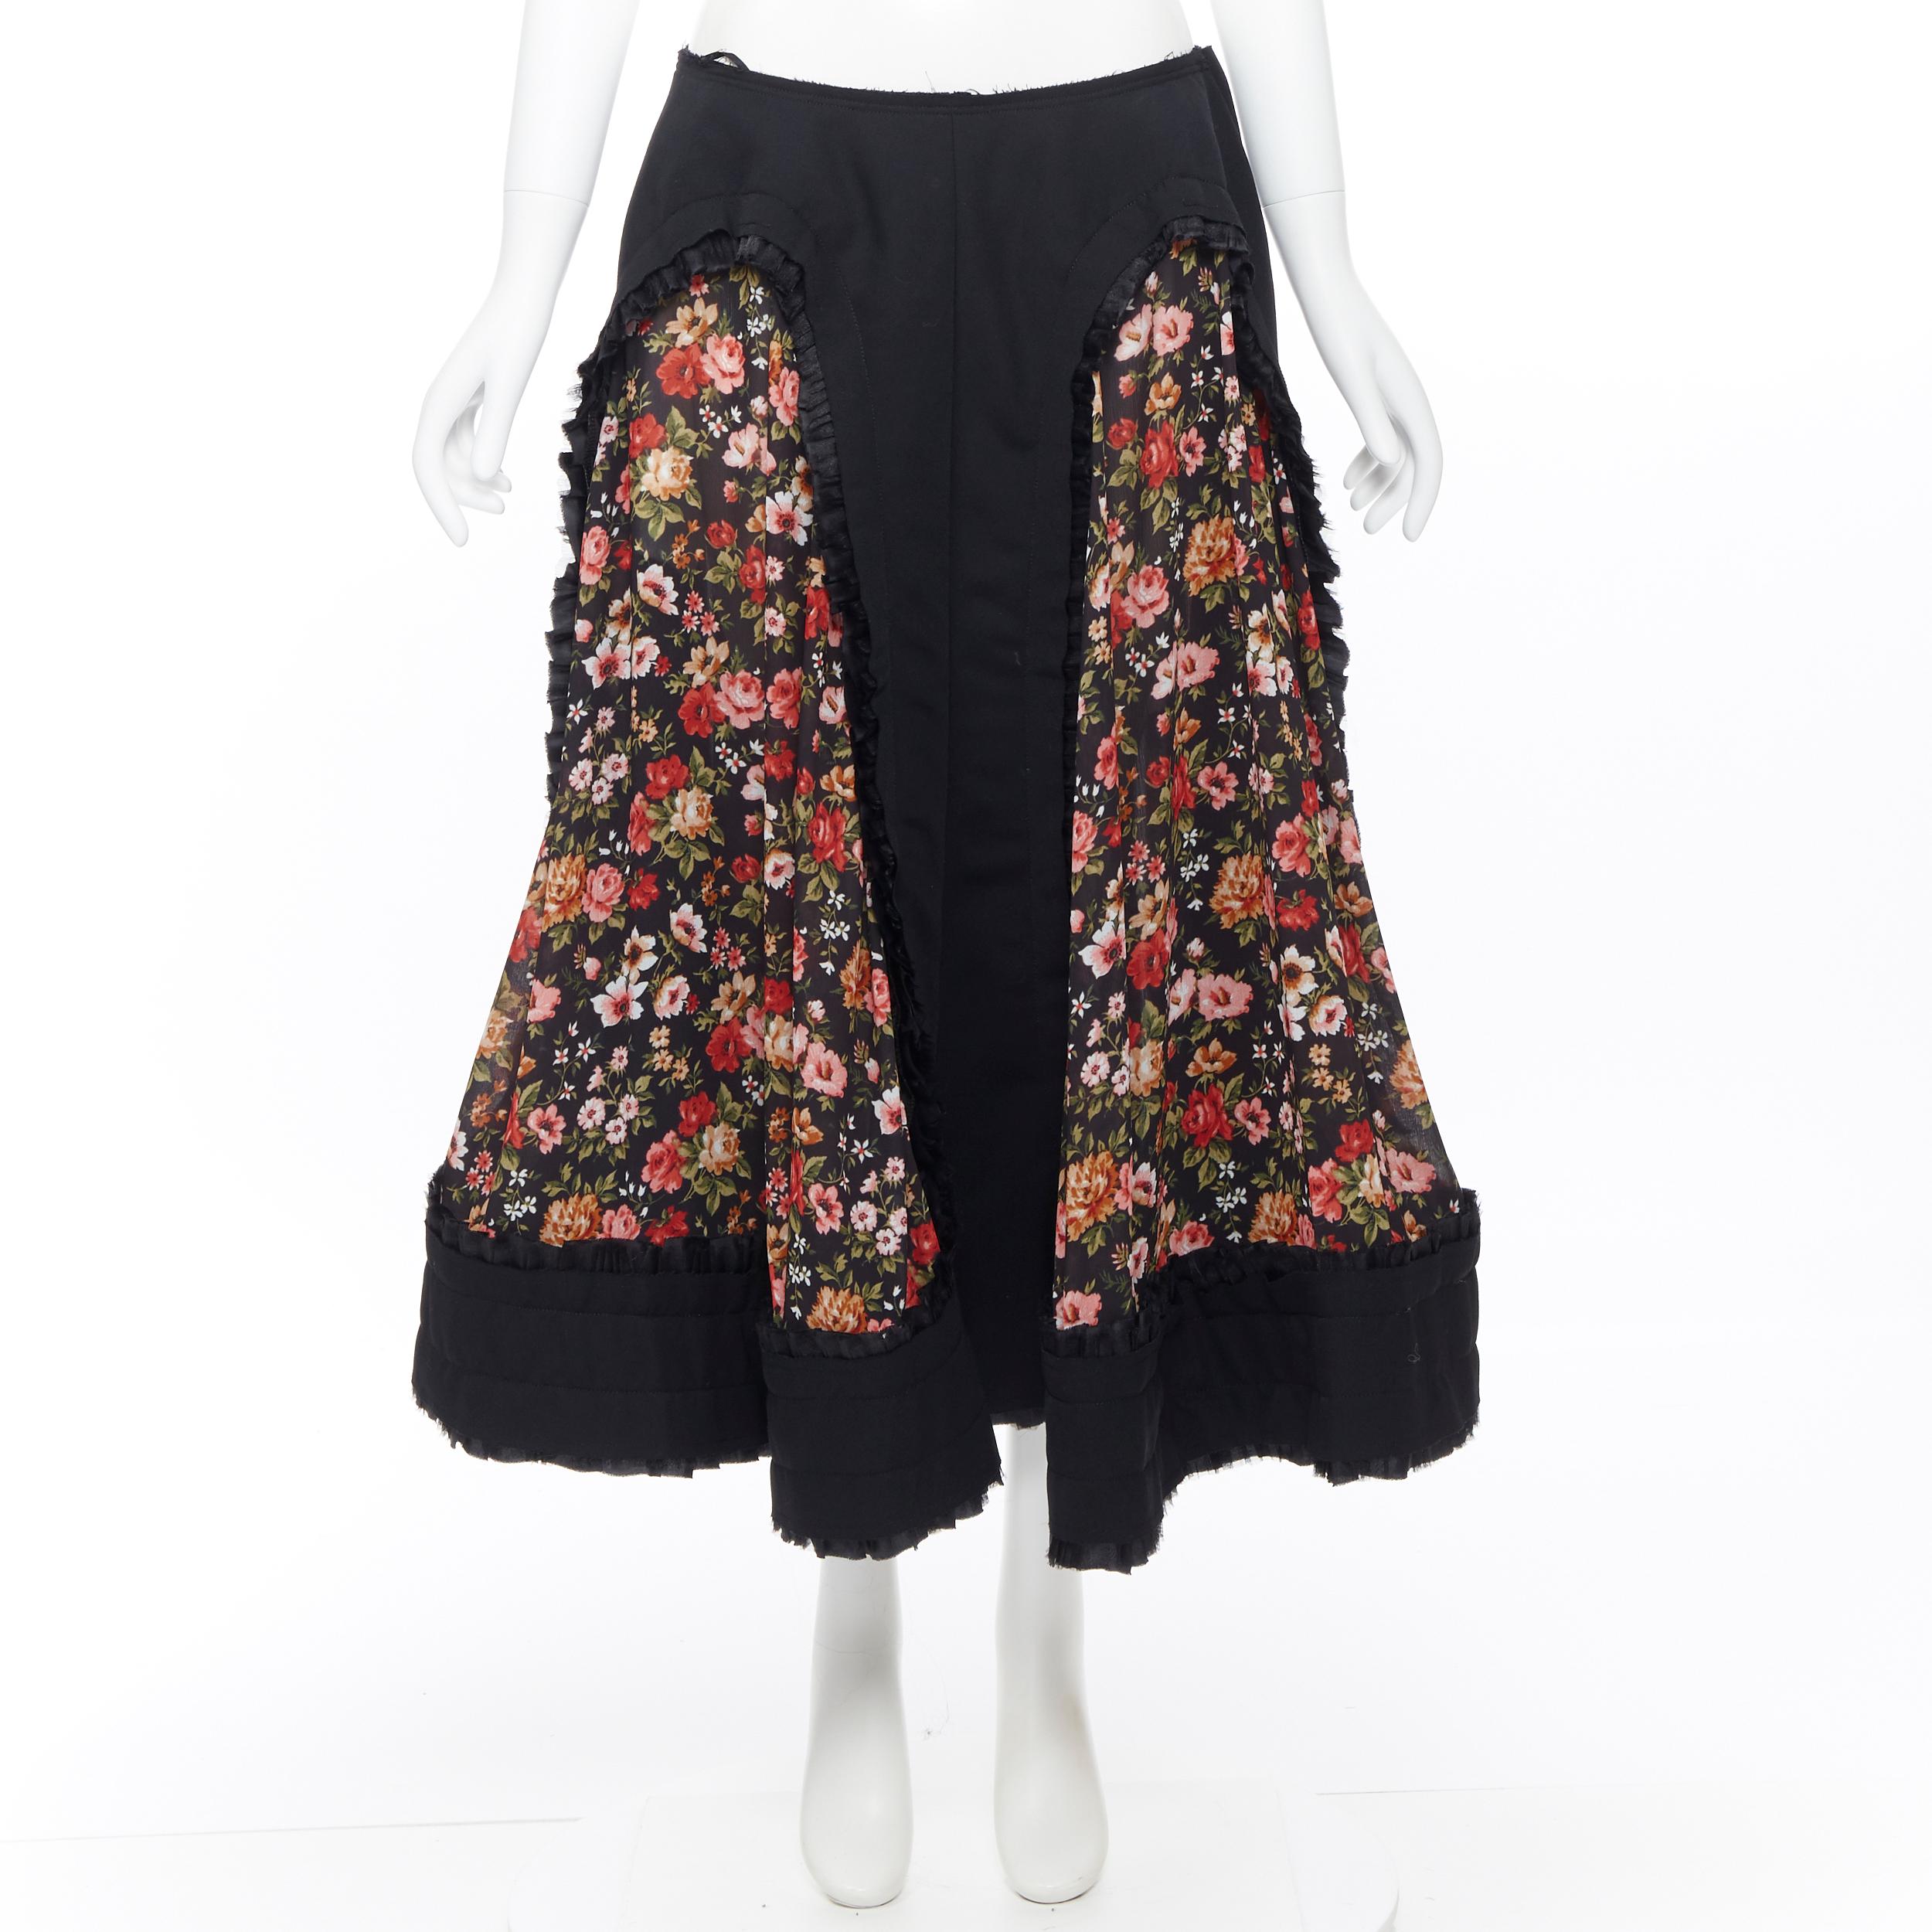 new COMME DES GARCONS AD2018 black vintage floral ruffle trimmed boho skirt M Reference: TGAS/A04822 
Brand: Comme Des Garcons 
Designer: Rei Kawakubo 
Collection: Fall Winter 2018 
Material: Wool 
Color: Black 
Pattern: Floral 
Closure: Zip